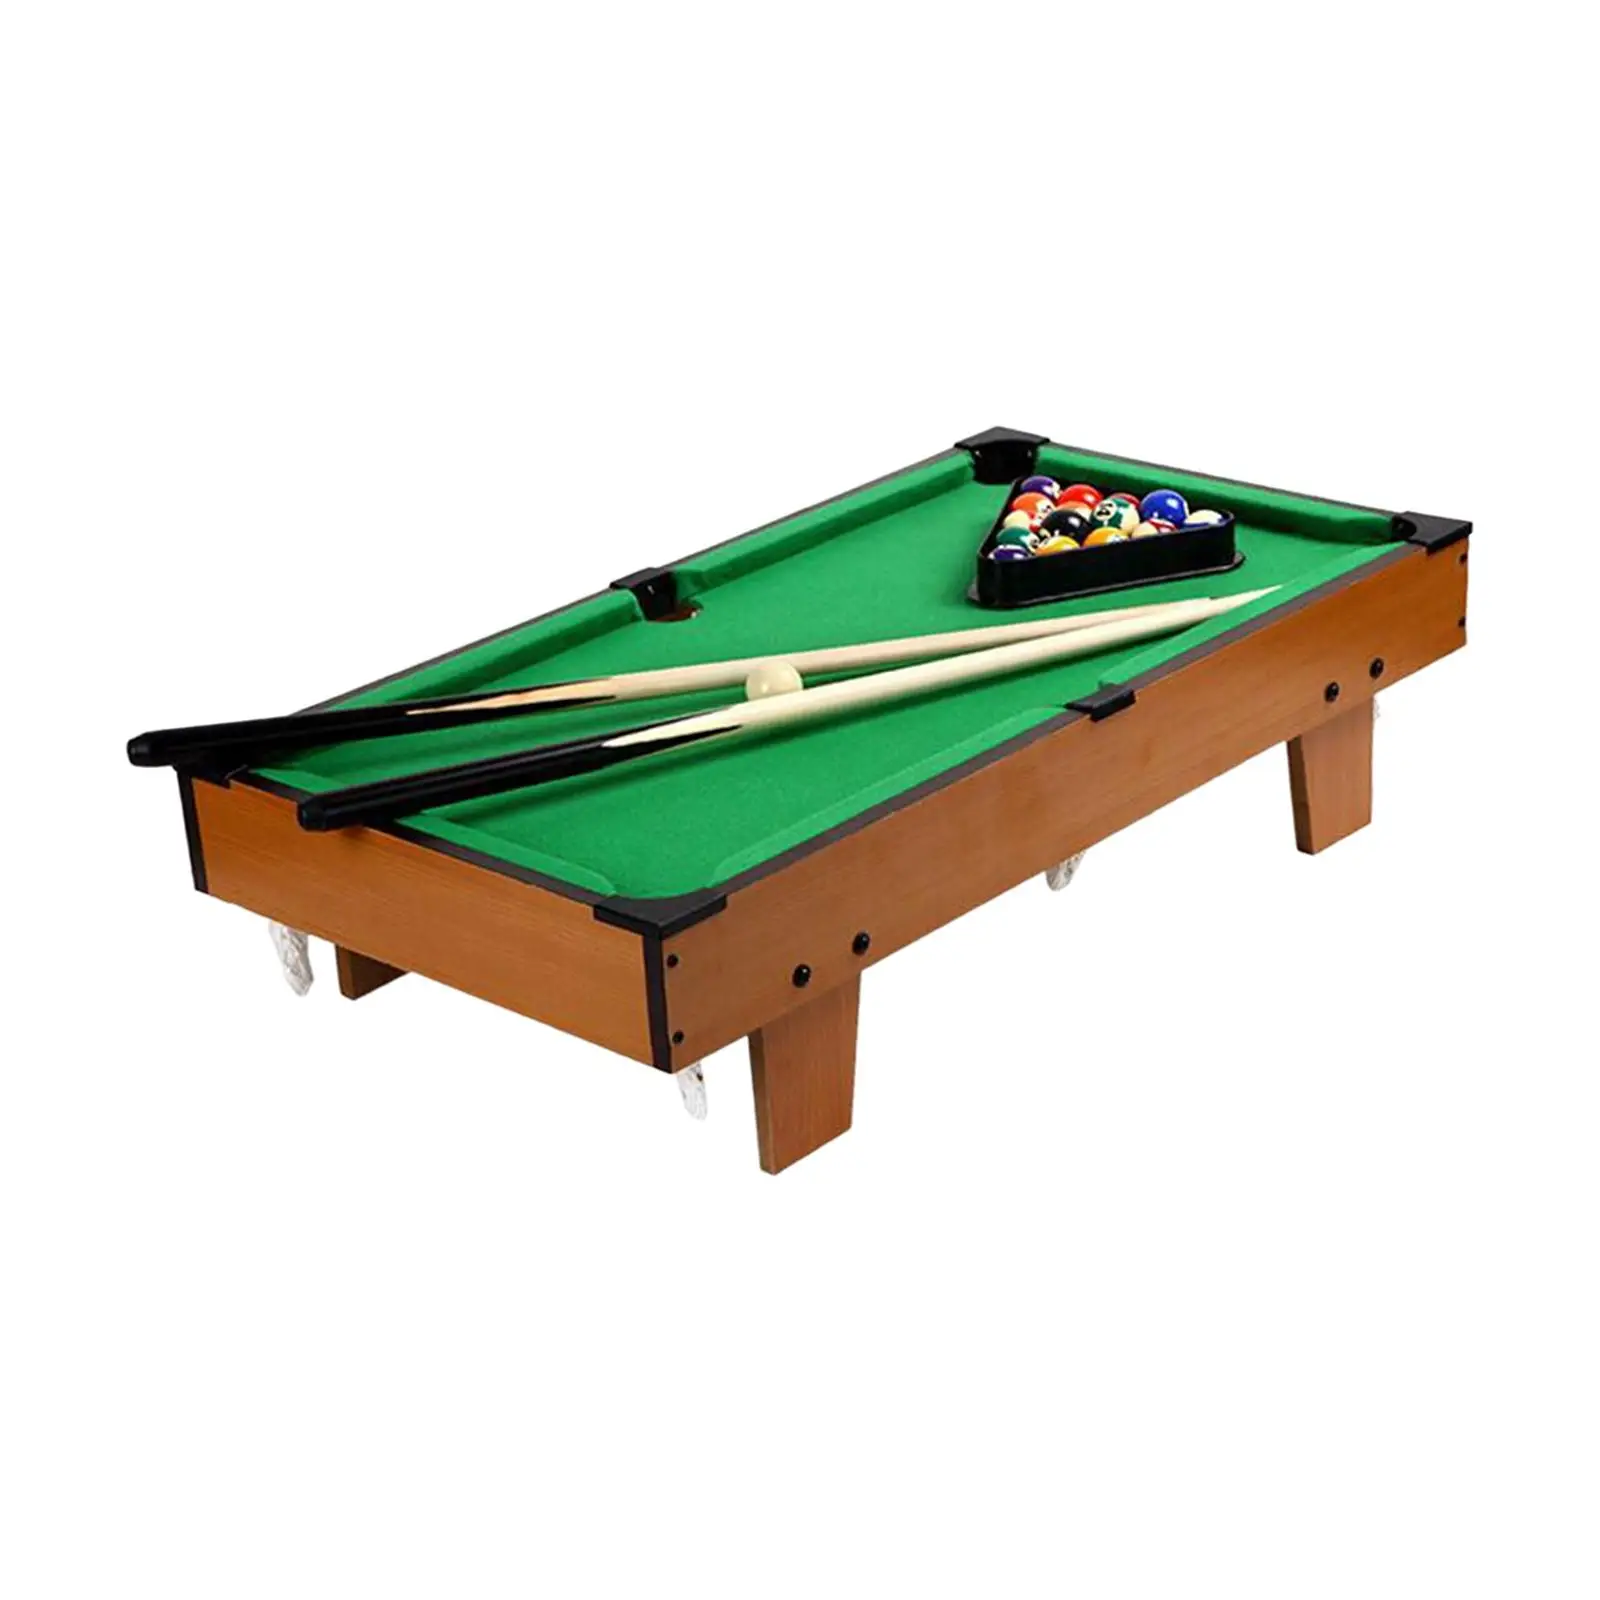 Pool Table Set Board Games Leisure Wood Small Tabletop Billiards for Family